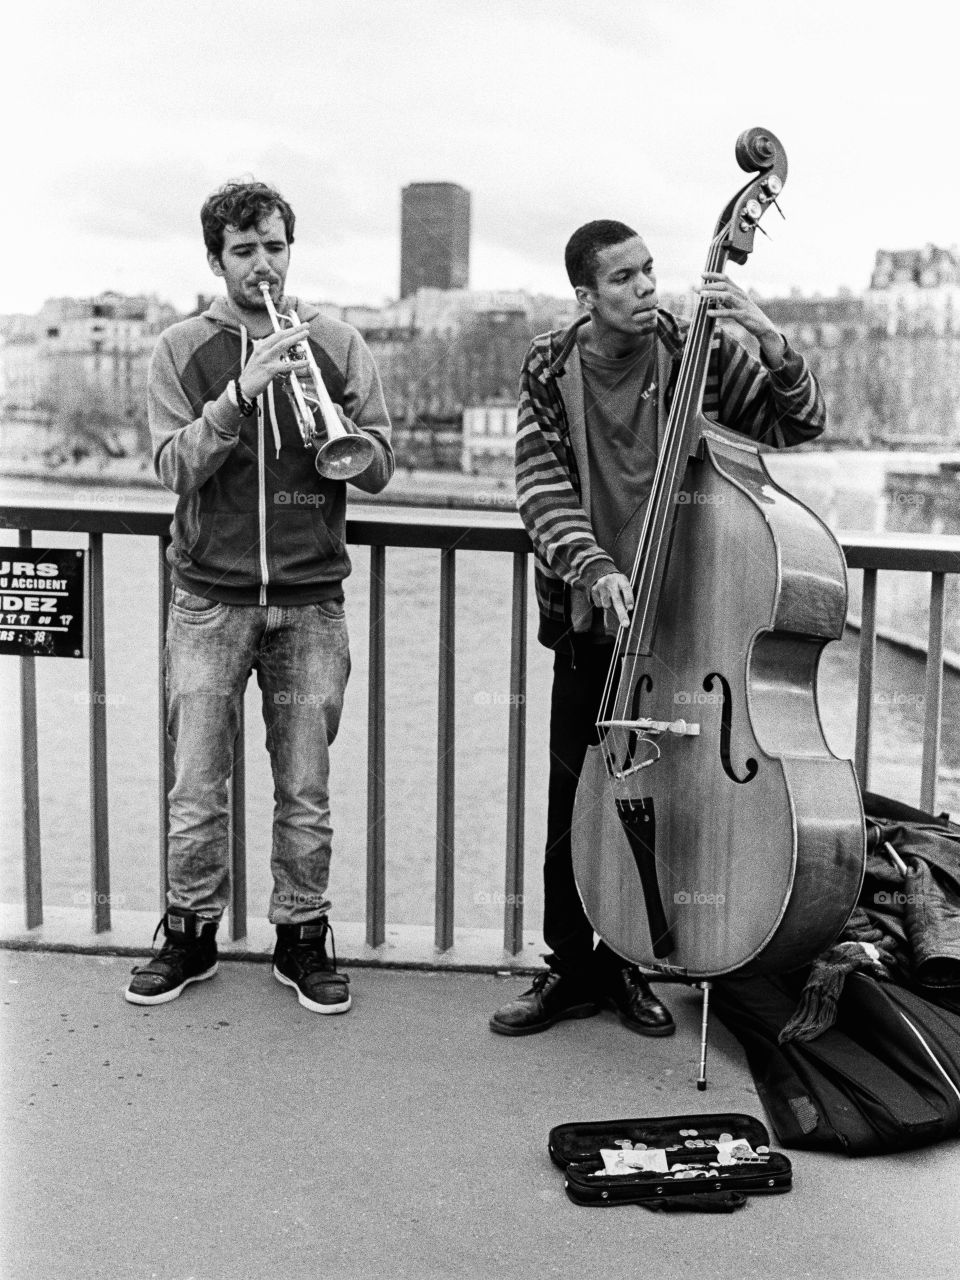 Two buskers on the Pont Saint-Louis